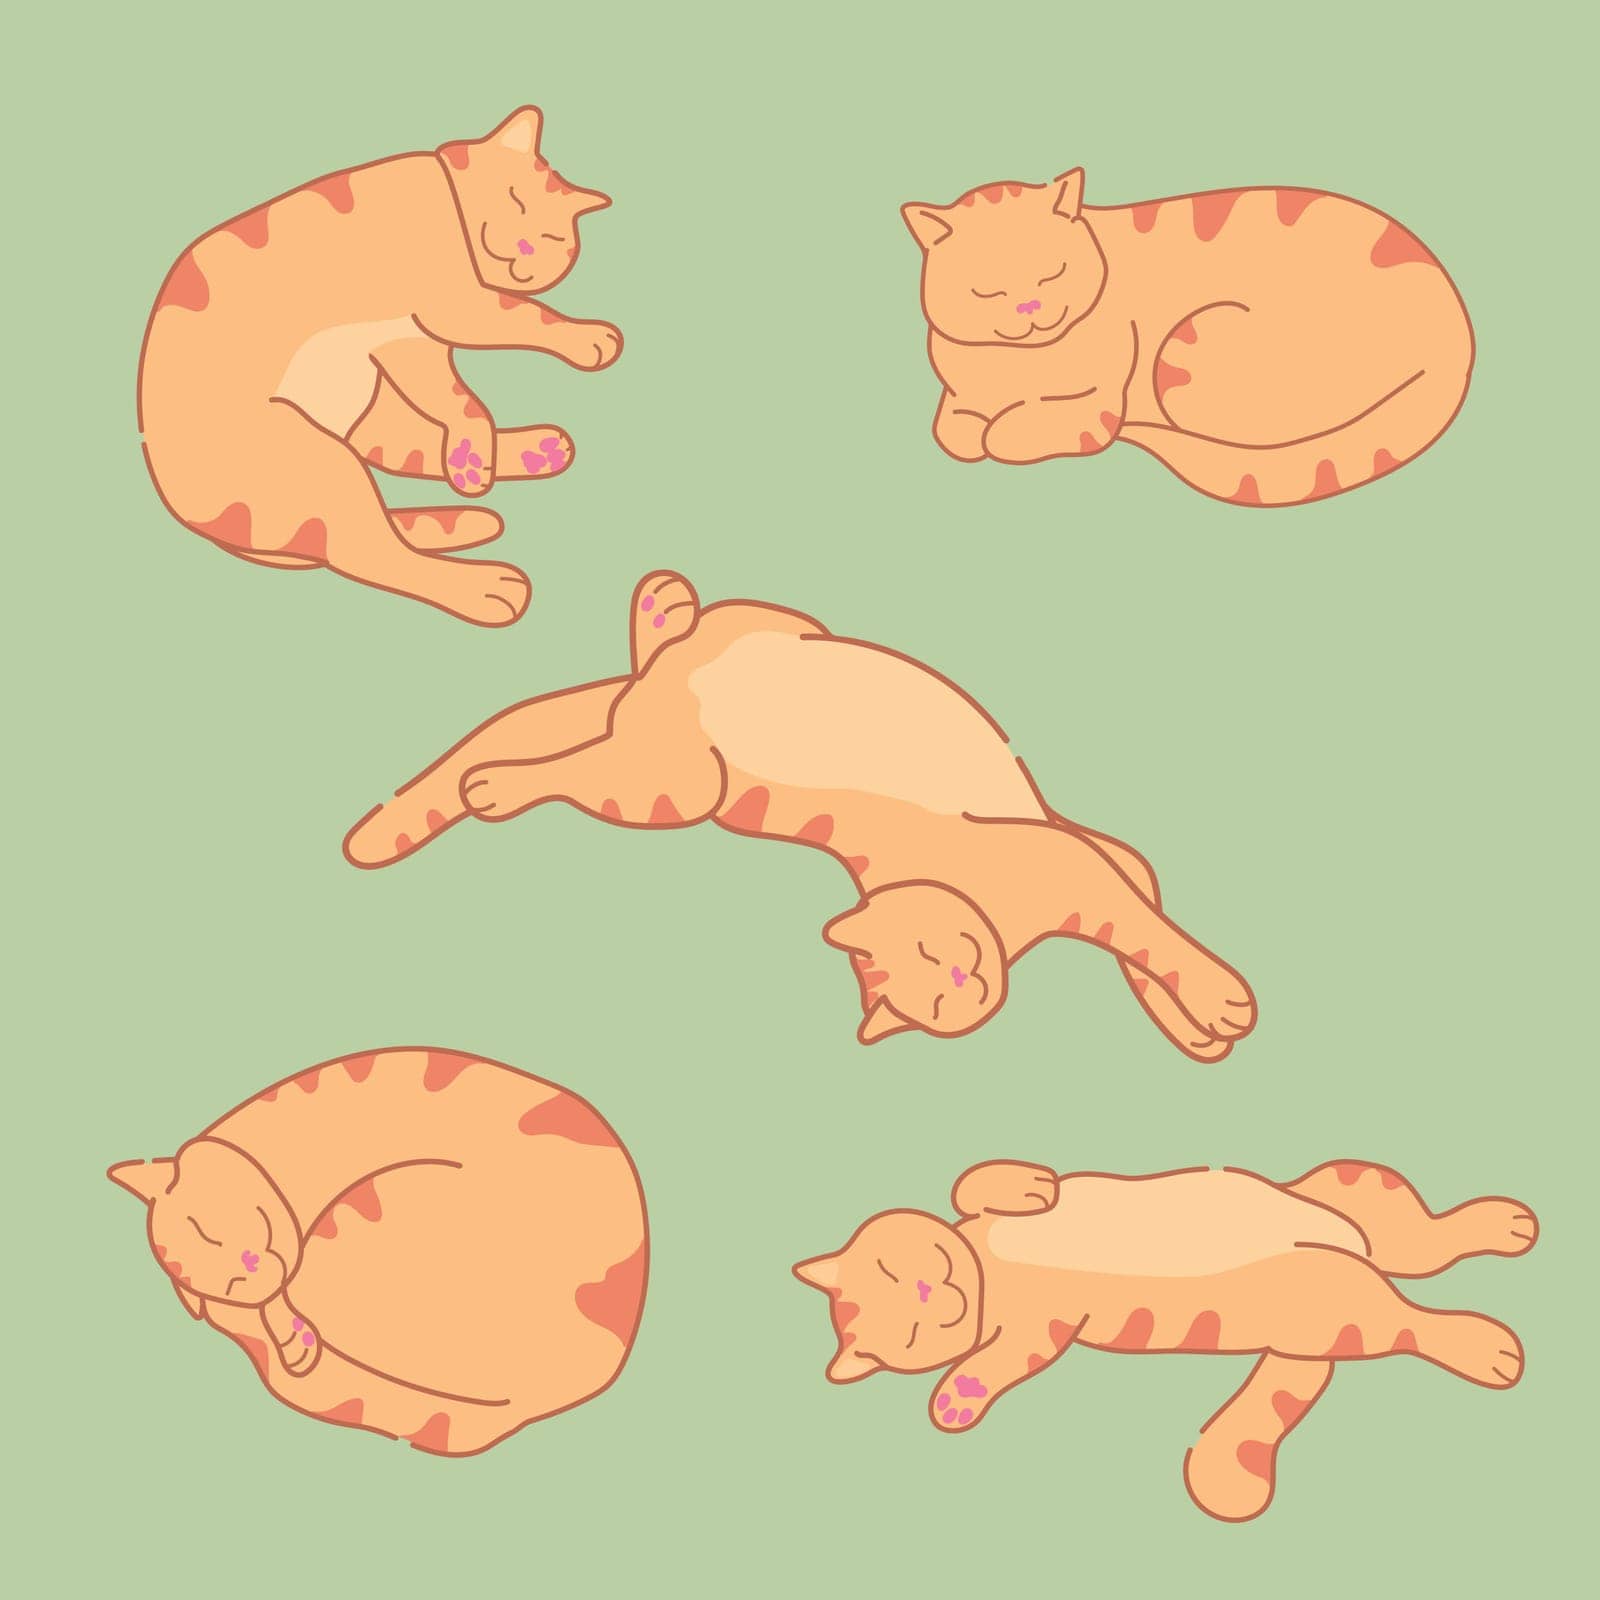 Sleeping ginger cat in different positions. Cute red tabby cat sleeps. Sleepy cat set. Vector illustration